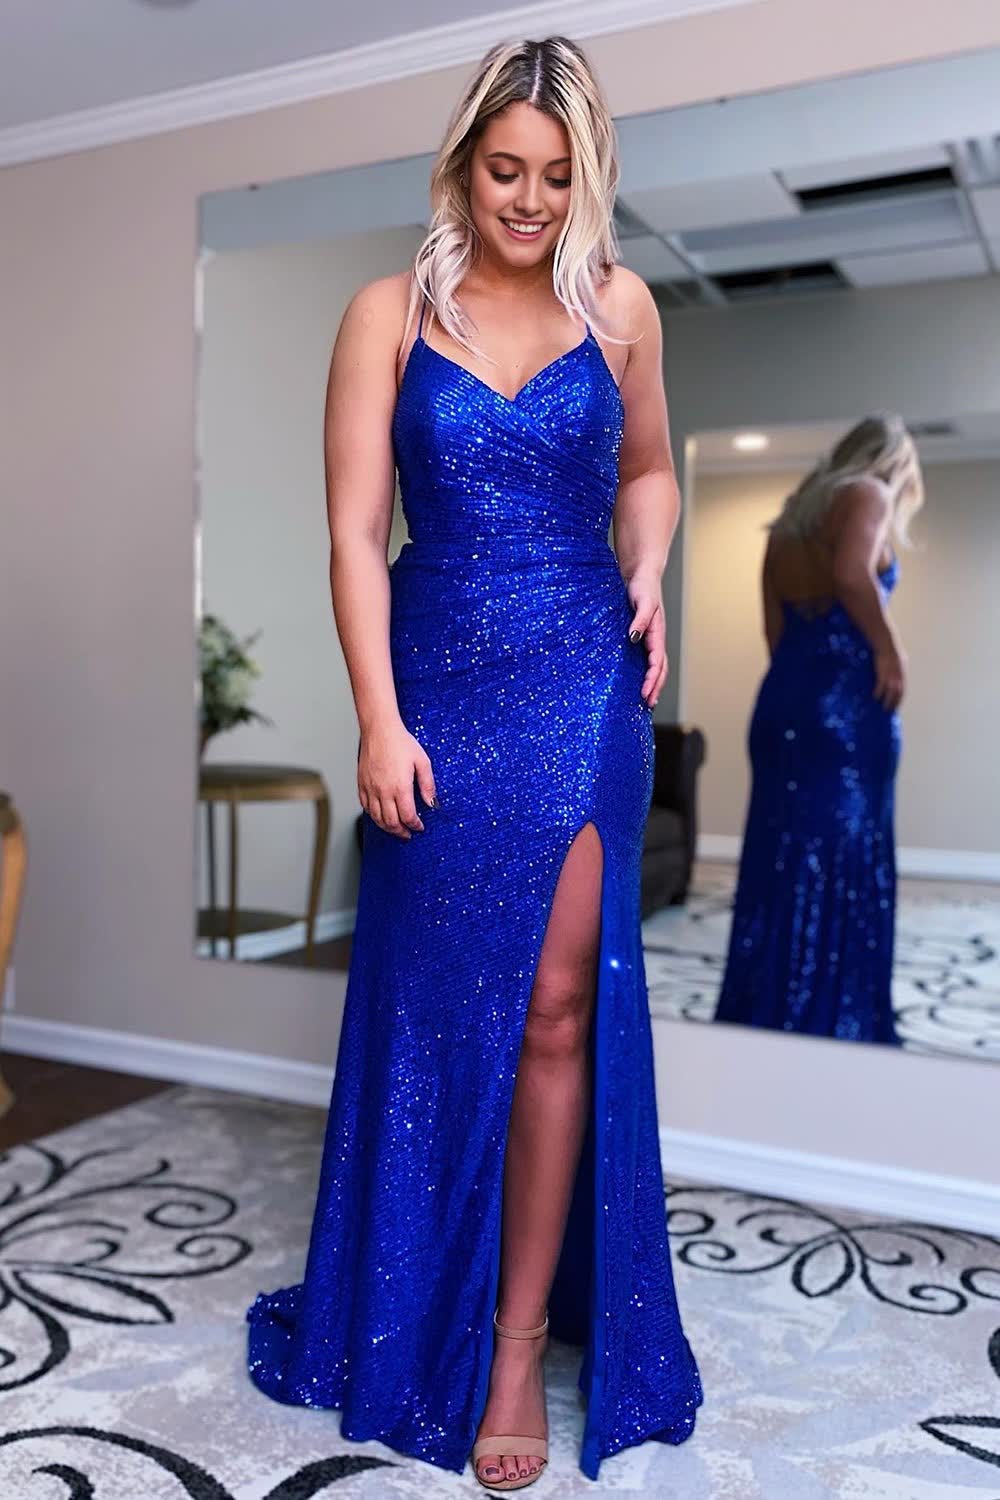 Sparkly Royal Blue Mermaid Sequins Long Corset Prom Dress with Slit Gowns, Sparkly Royal Blue Mermaid Sequins Long Prom Dress with Slit